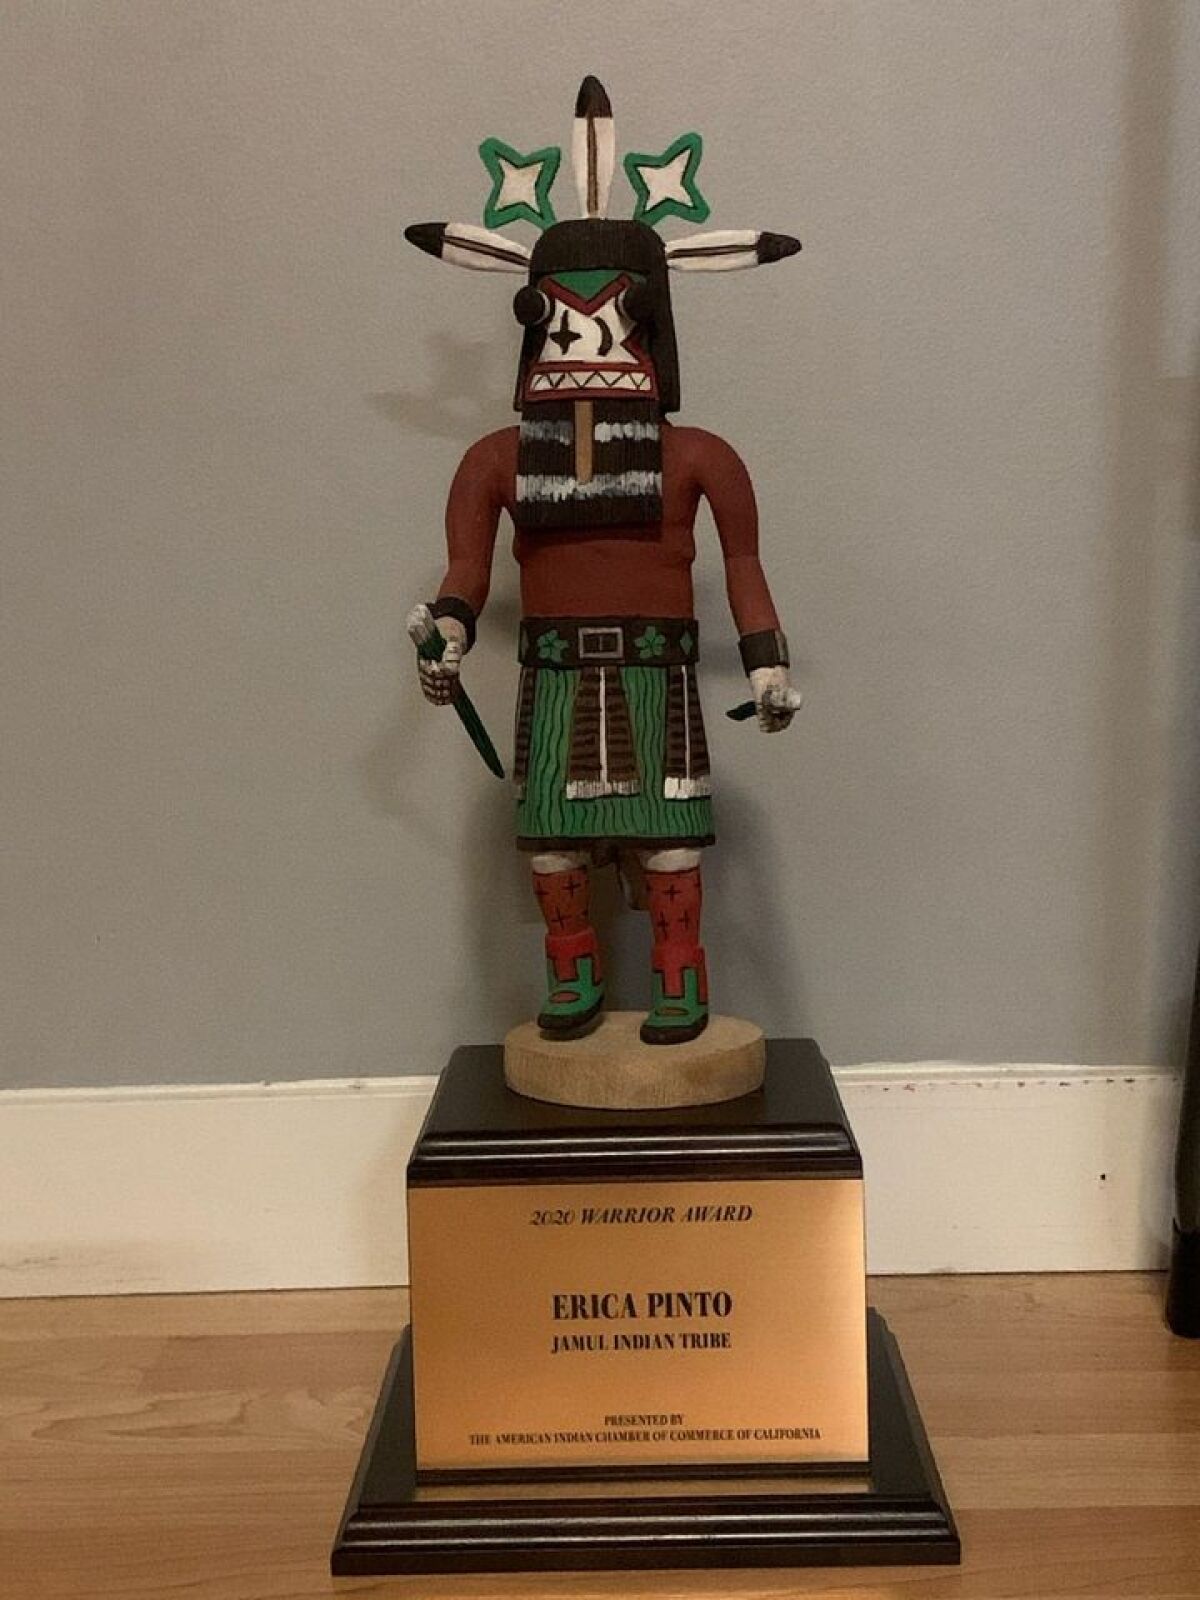 The kachina doll given to Erica Pinto from the American Indian Chamber of Commerce of California.